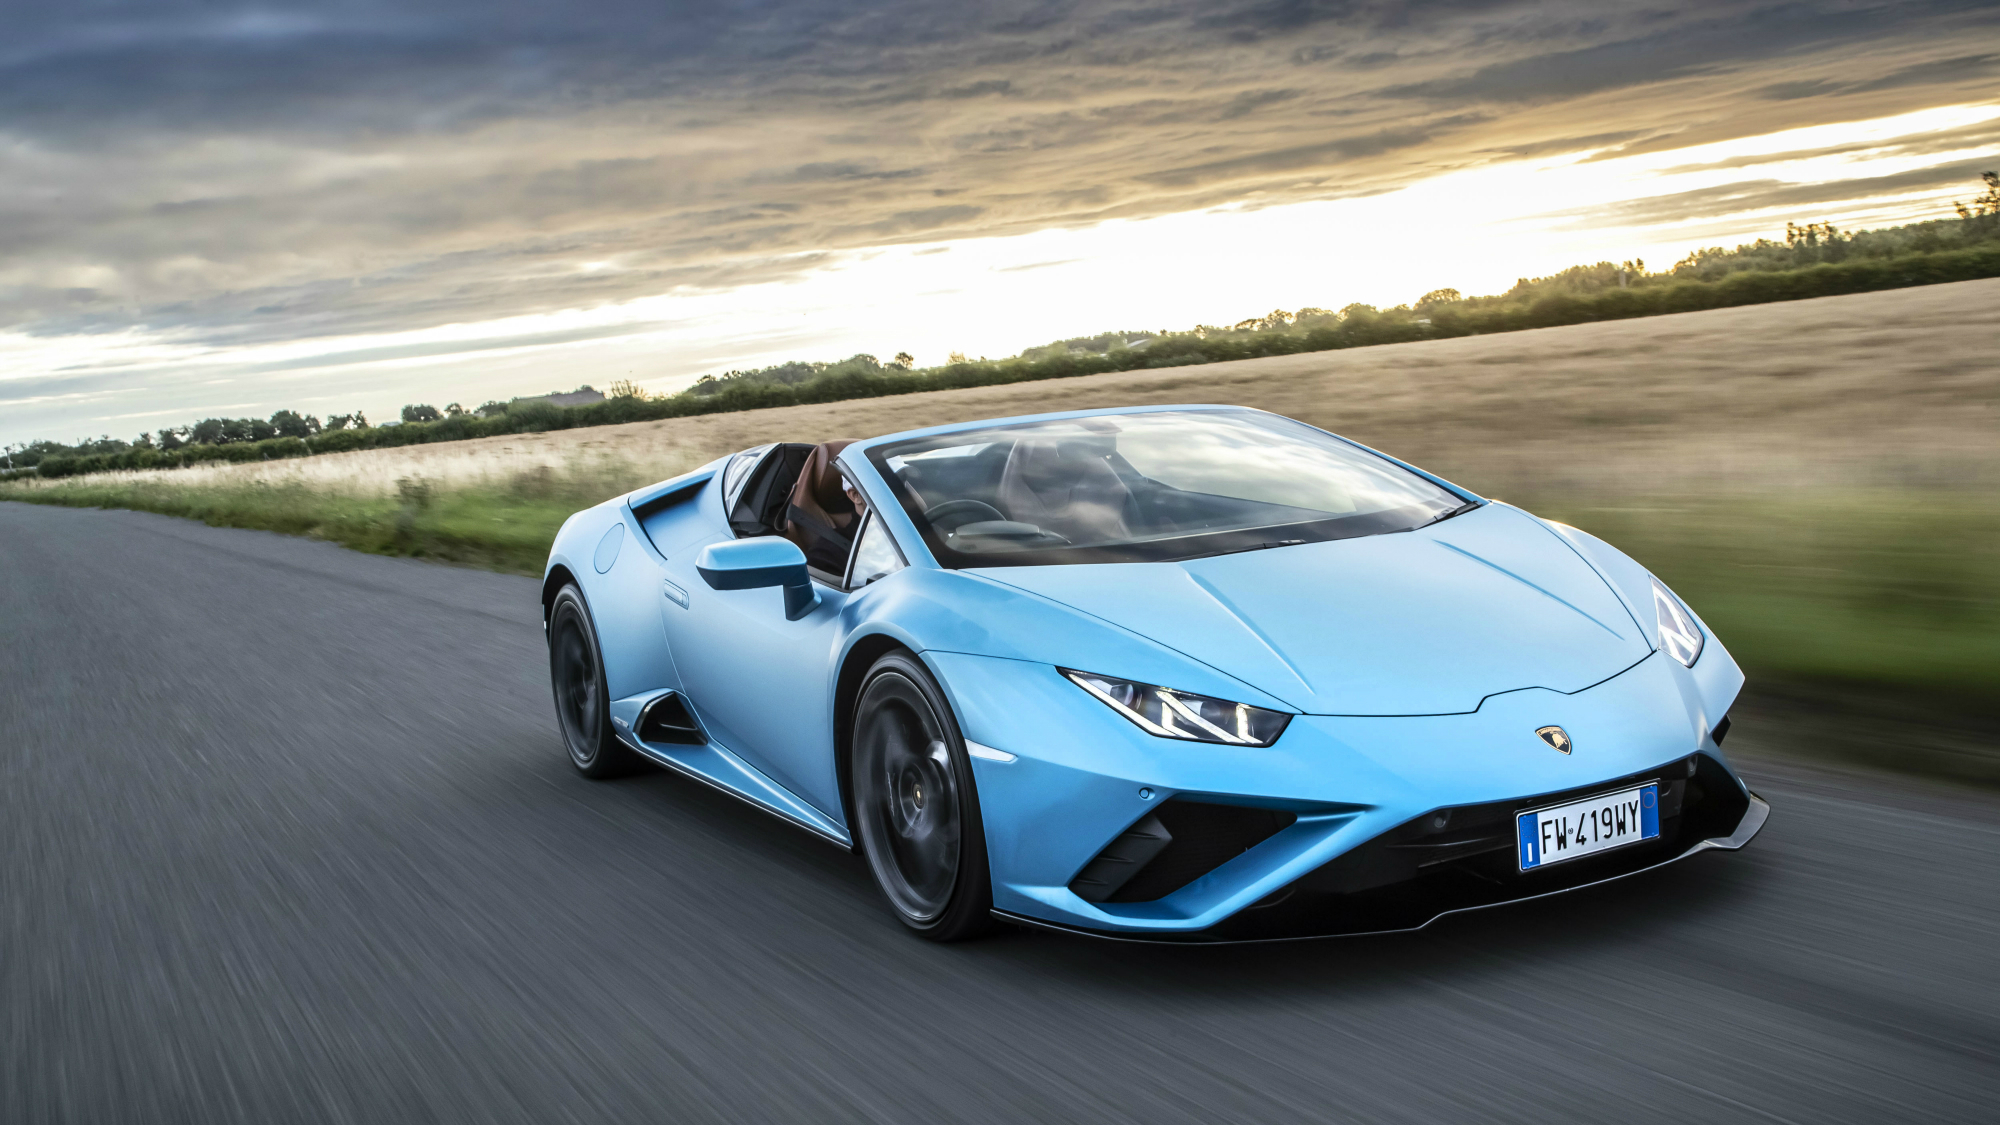 Why the Lamborghini Huracan Evo is dominating the roads | Marie Claire UK